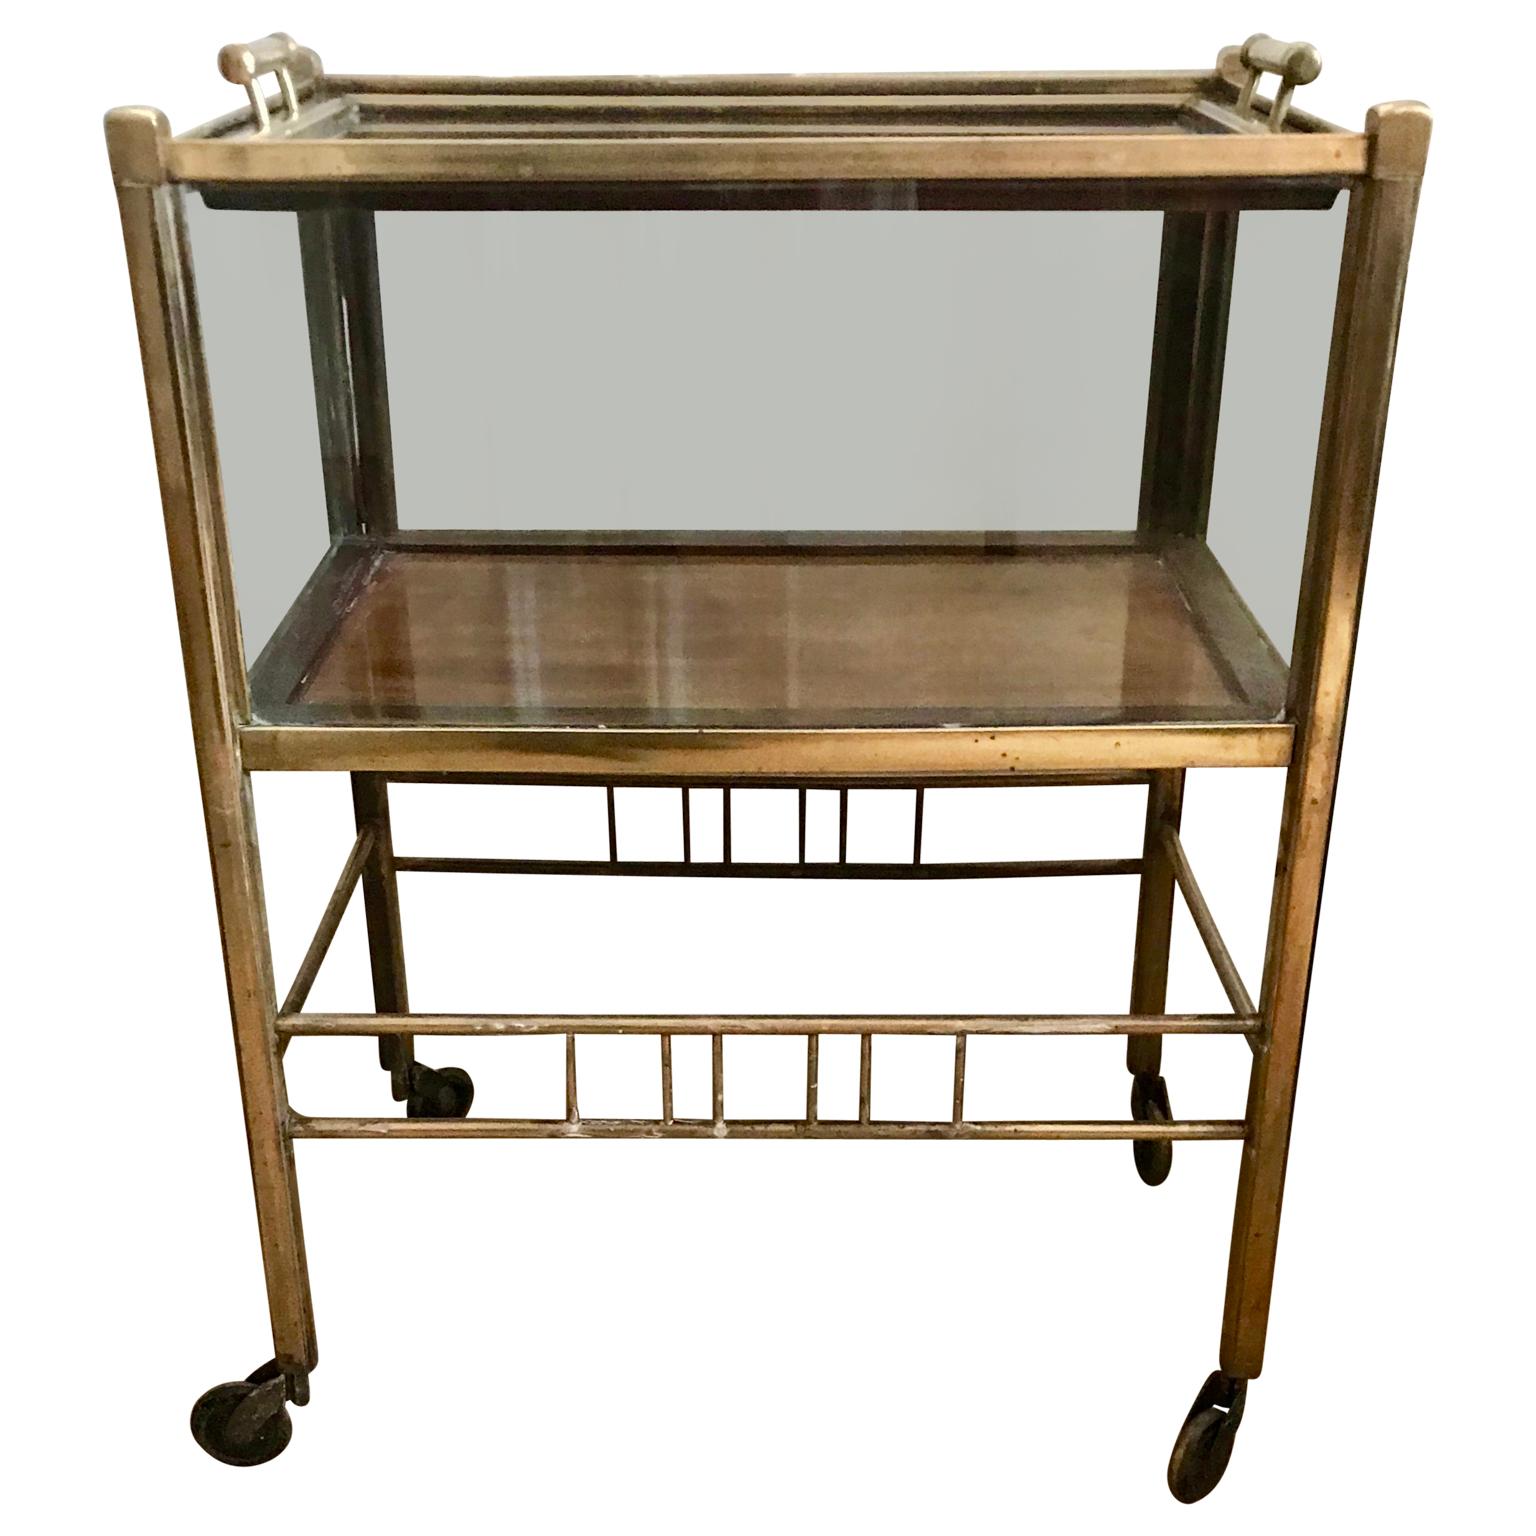 20th Century Art Deco Brass and Wood Bar Cart Trolley by Ernst Rockhausen, Germany, 1920s